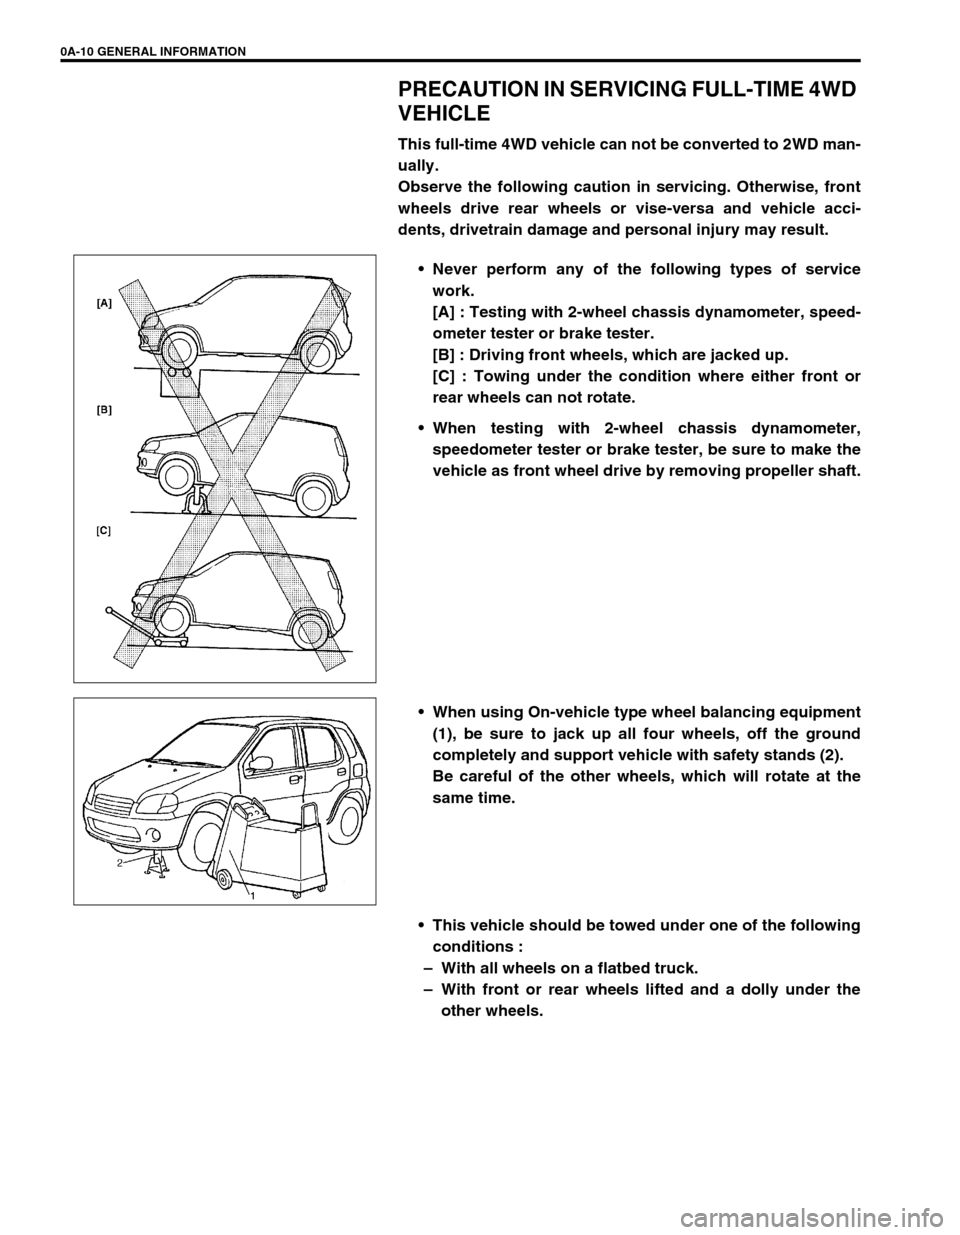 SUZUKI SWIFT 2000 1.G RG413 Service Workshop Manual 0A-10 GENERAL INFORMATION
PRECAUTION IN SERVICING FULL-TIME 4WD 
VEHICLE
This full-time 4WD vehicle can not be converted to 2WD man-
ually.
Observe the following caution in servicing. Otherwise, front